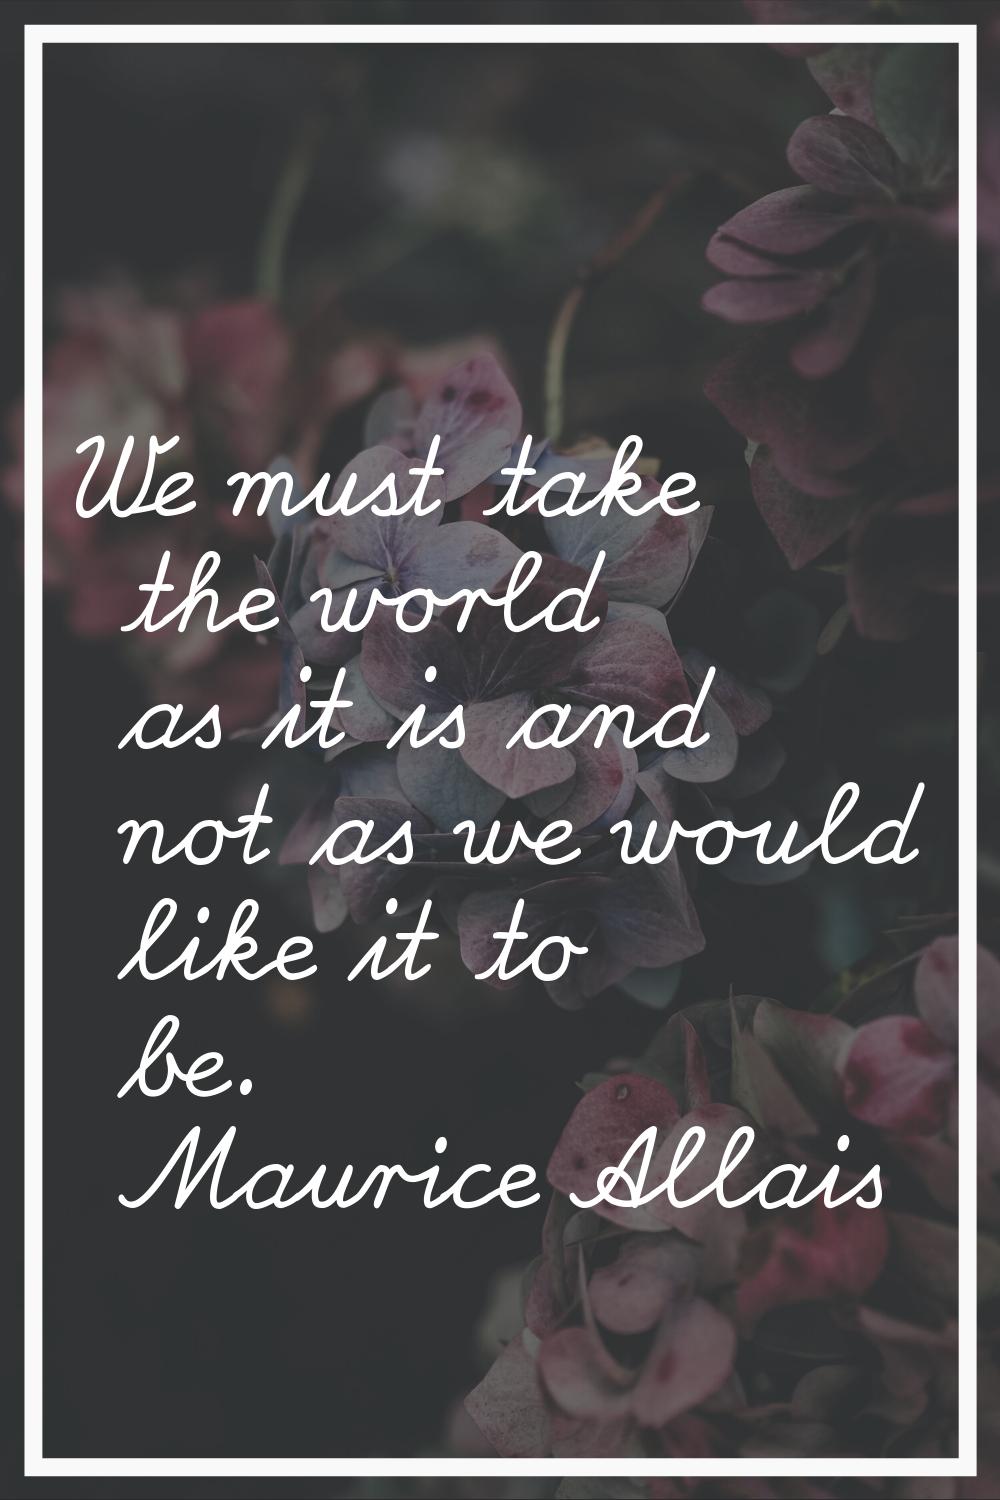 We must take the world as it is and not as we would like it to be.